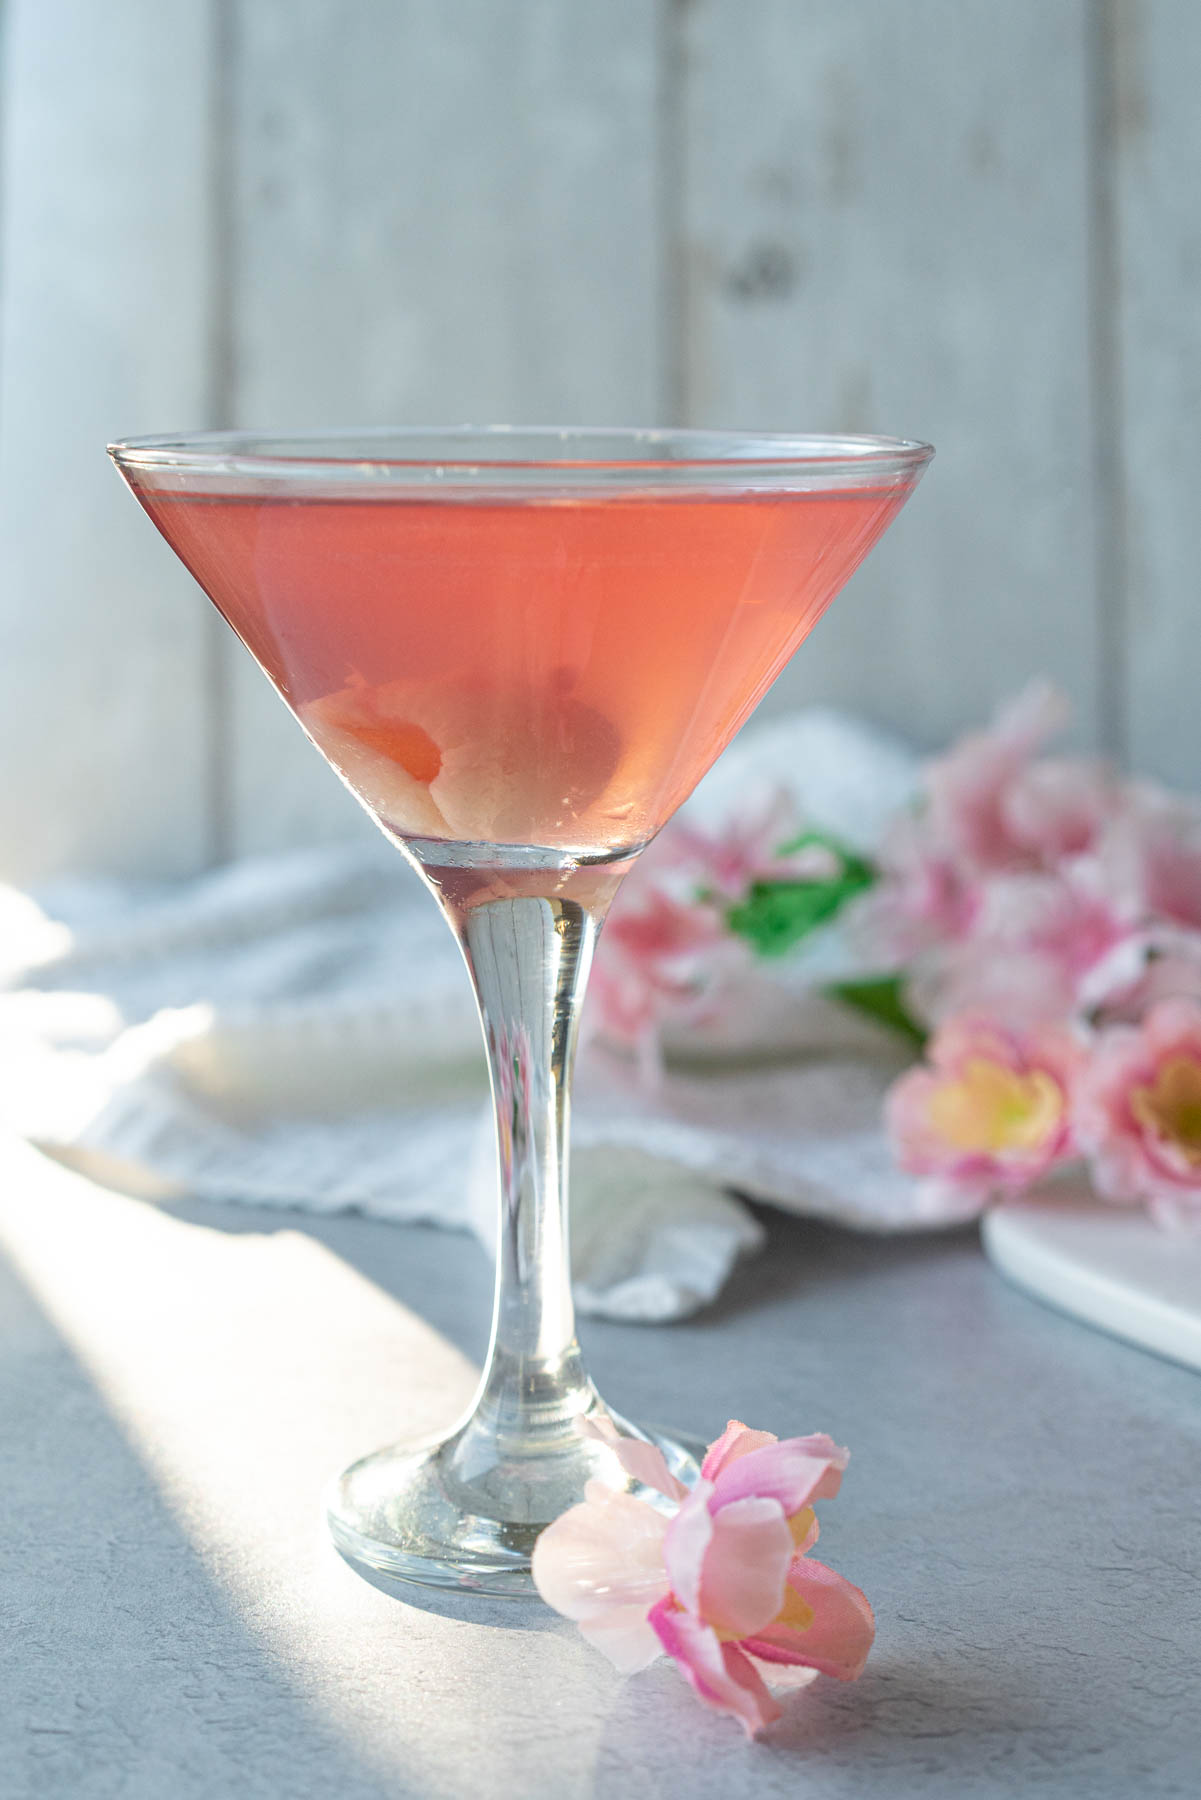 martini glass against a white background decorated with pale pink flowers; glass is filled with a pale pink drink and garnished with a lychee